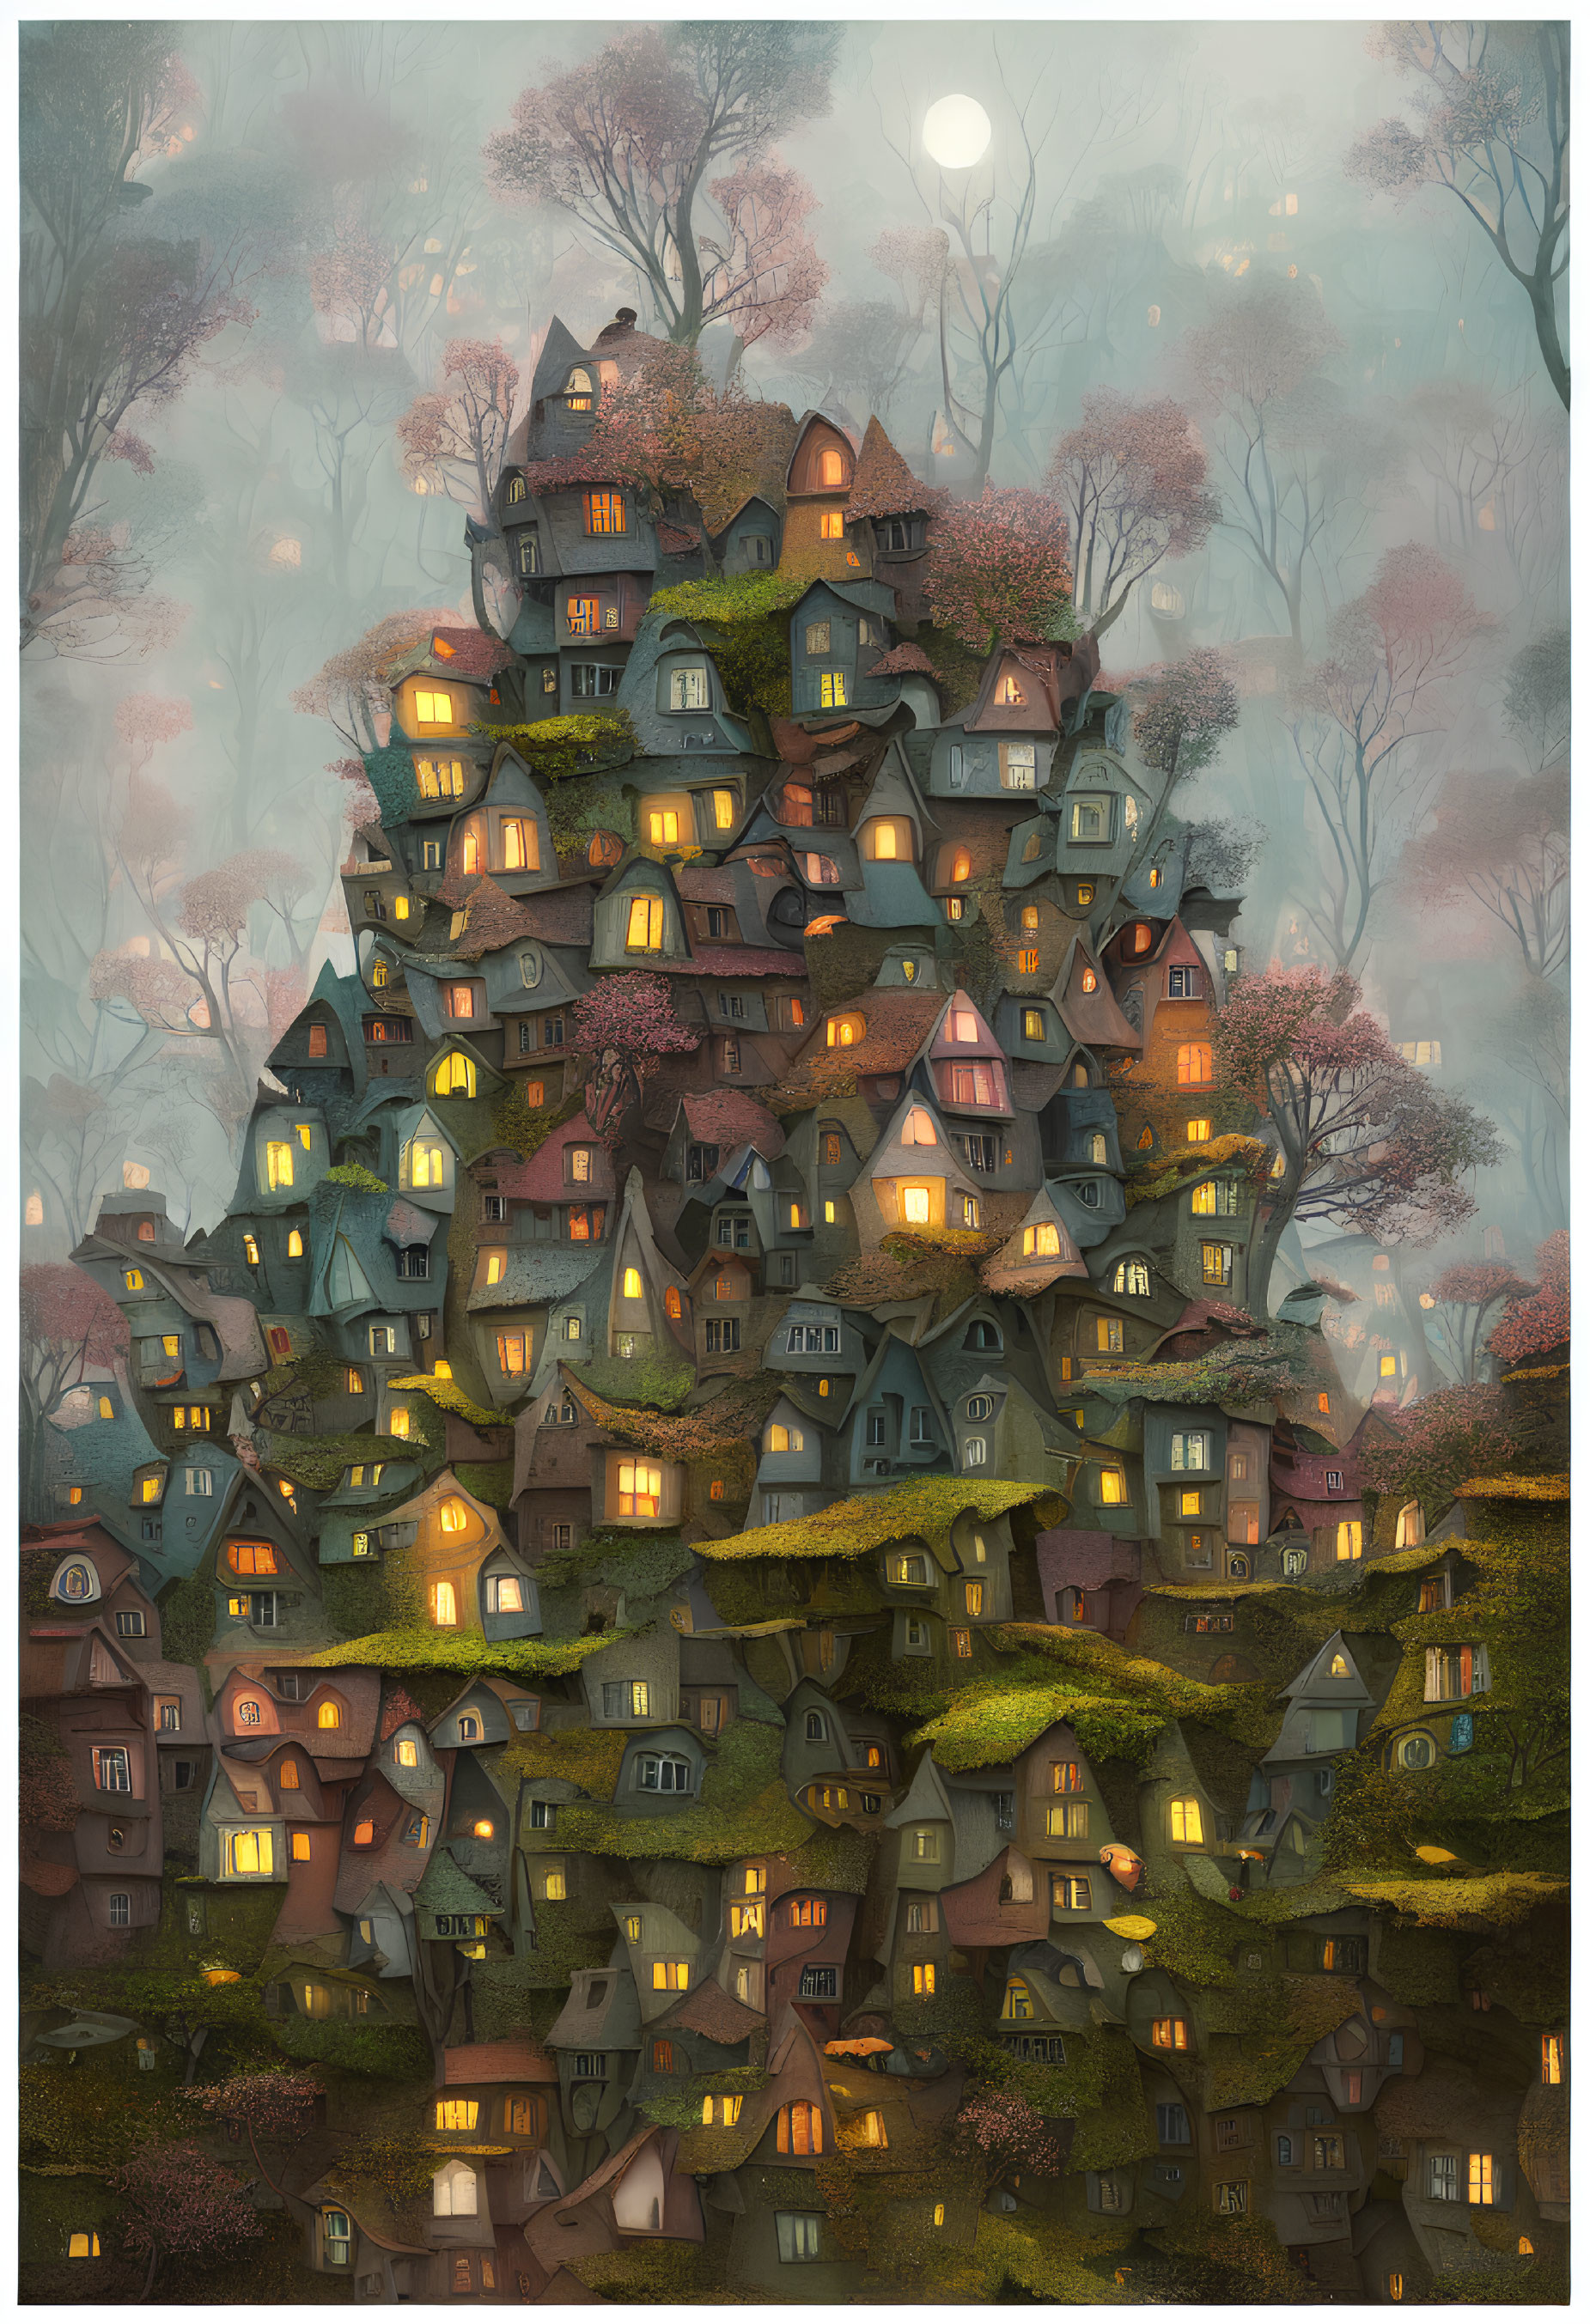 Illustration of Quirky Houses in Mystical Forest at Twilight